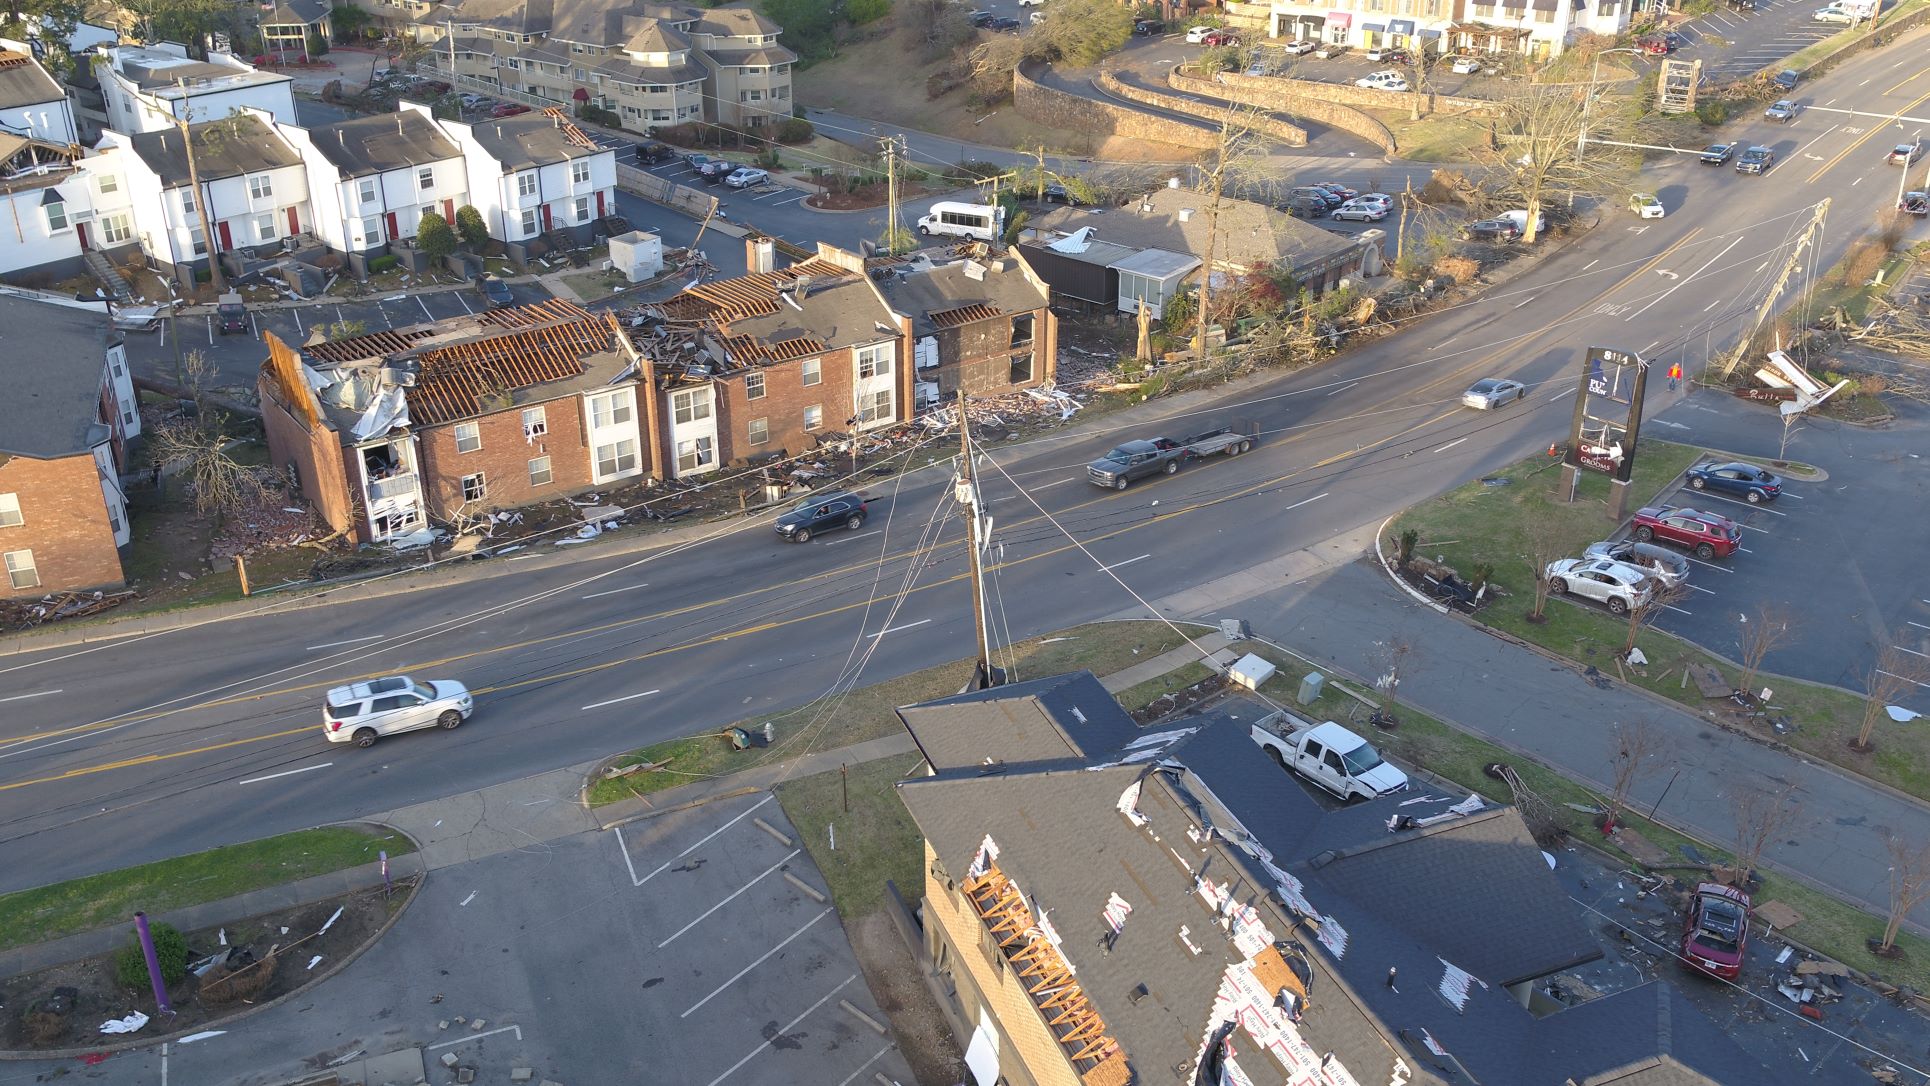 Damage as seen from an Entergy Arkansas drone scout on Foxcroft Drive in Little Rock.